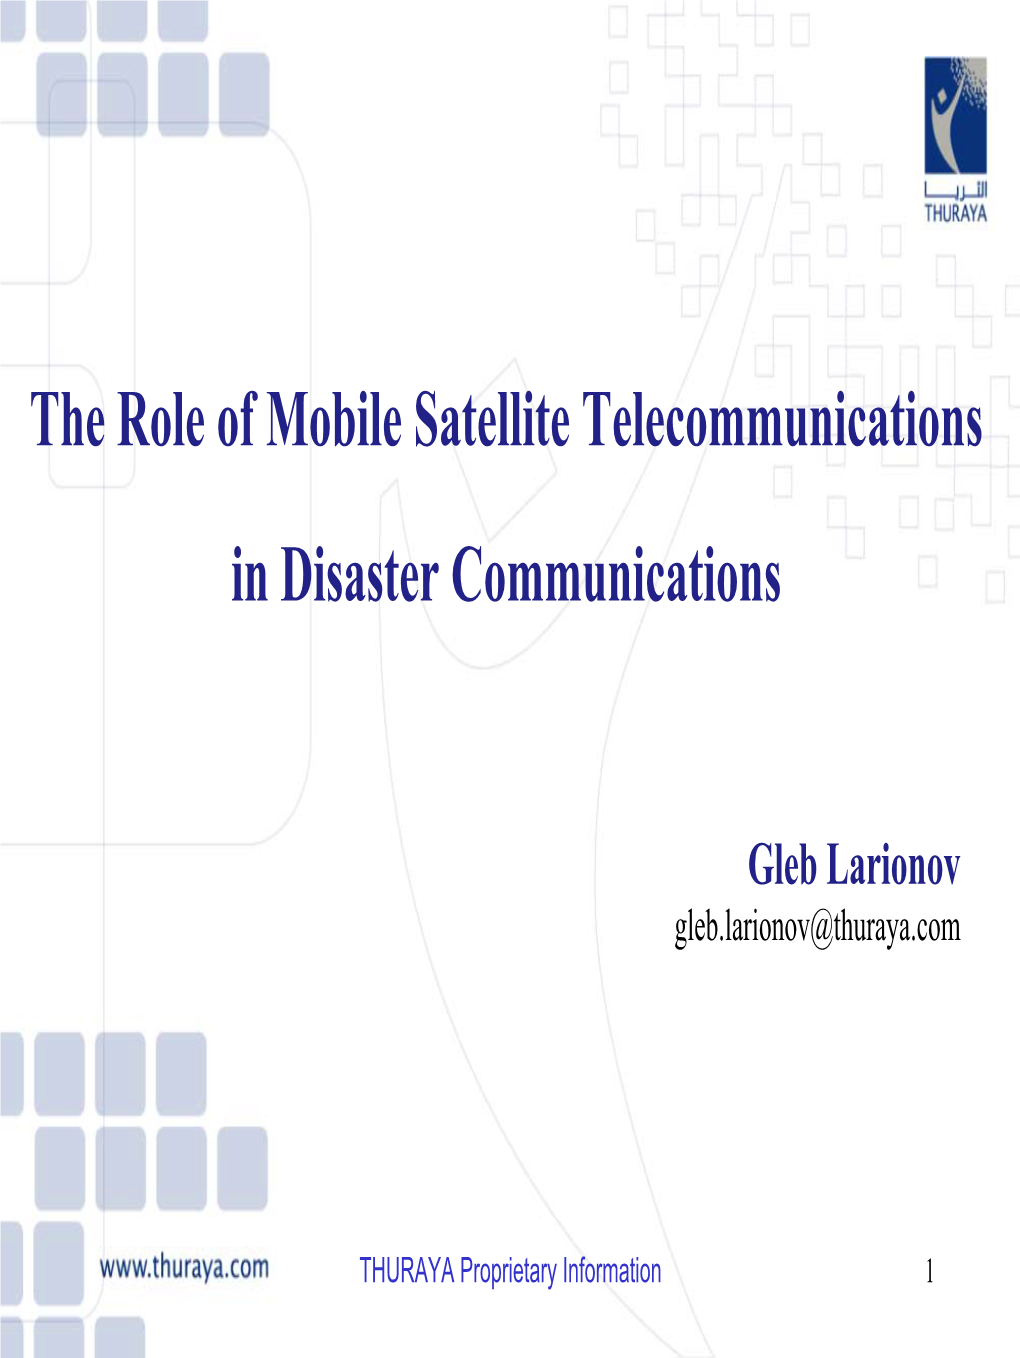 The Role of Mobile Satellite Telecommunications in Disaster Communications